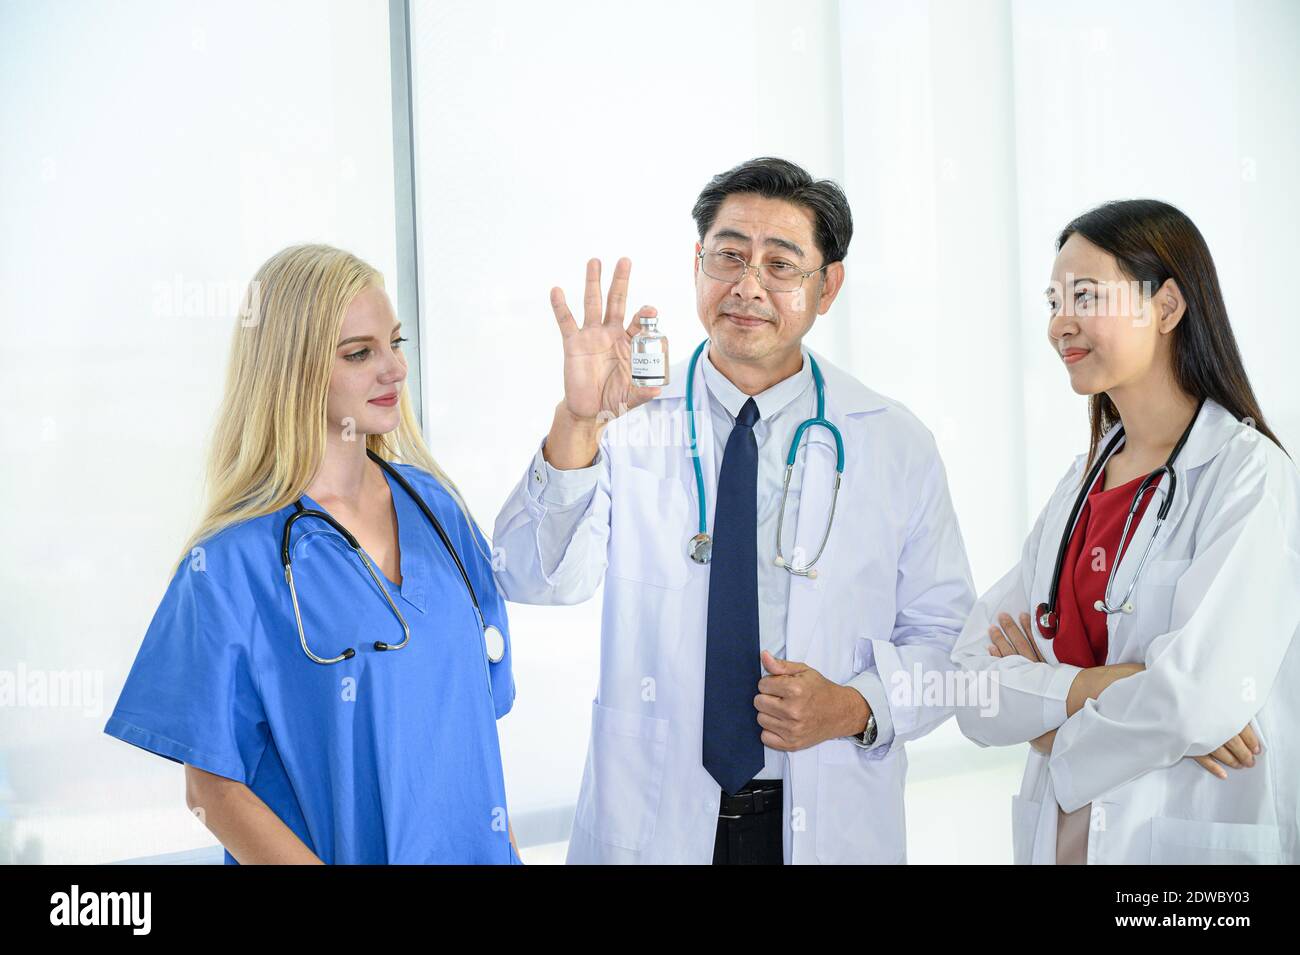 Group of doctors wearing formal white coat and blue scrubs suit, Teamwork brainstorm meeting at the hospital. Healthcare specialist people. Stock Photo